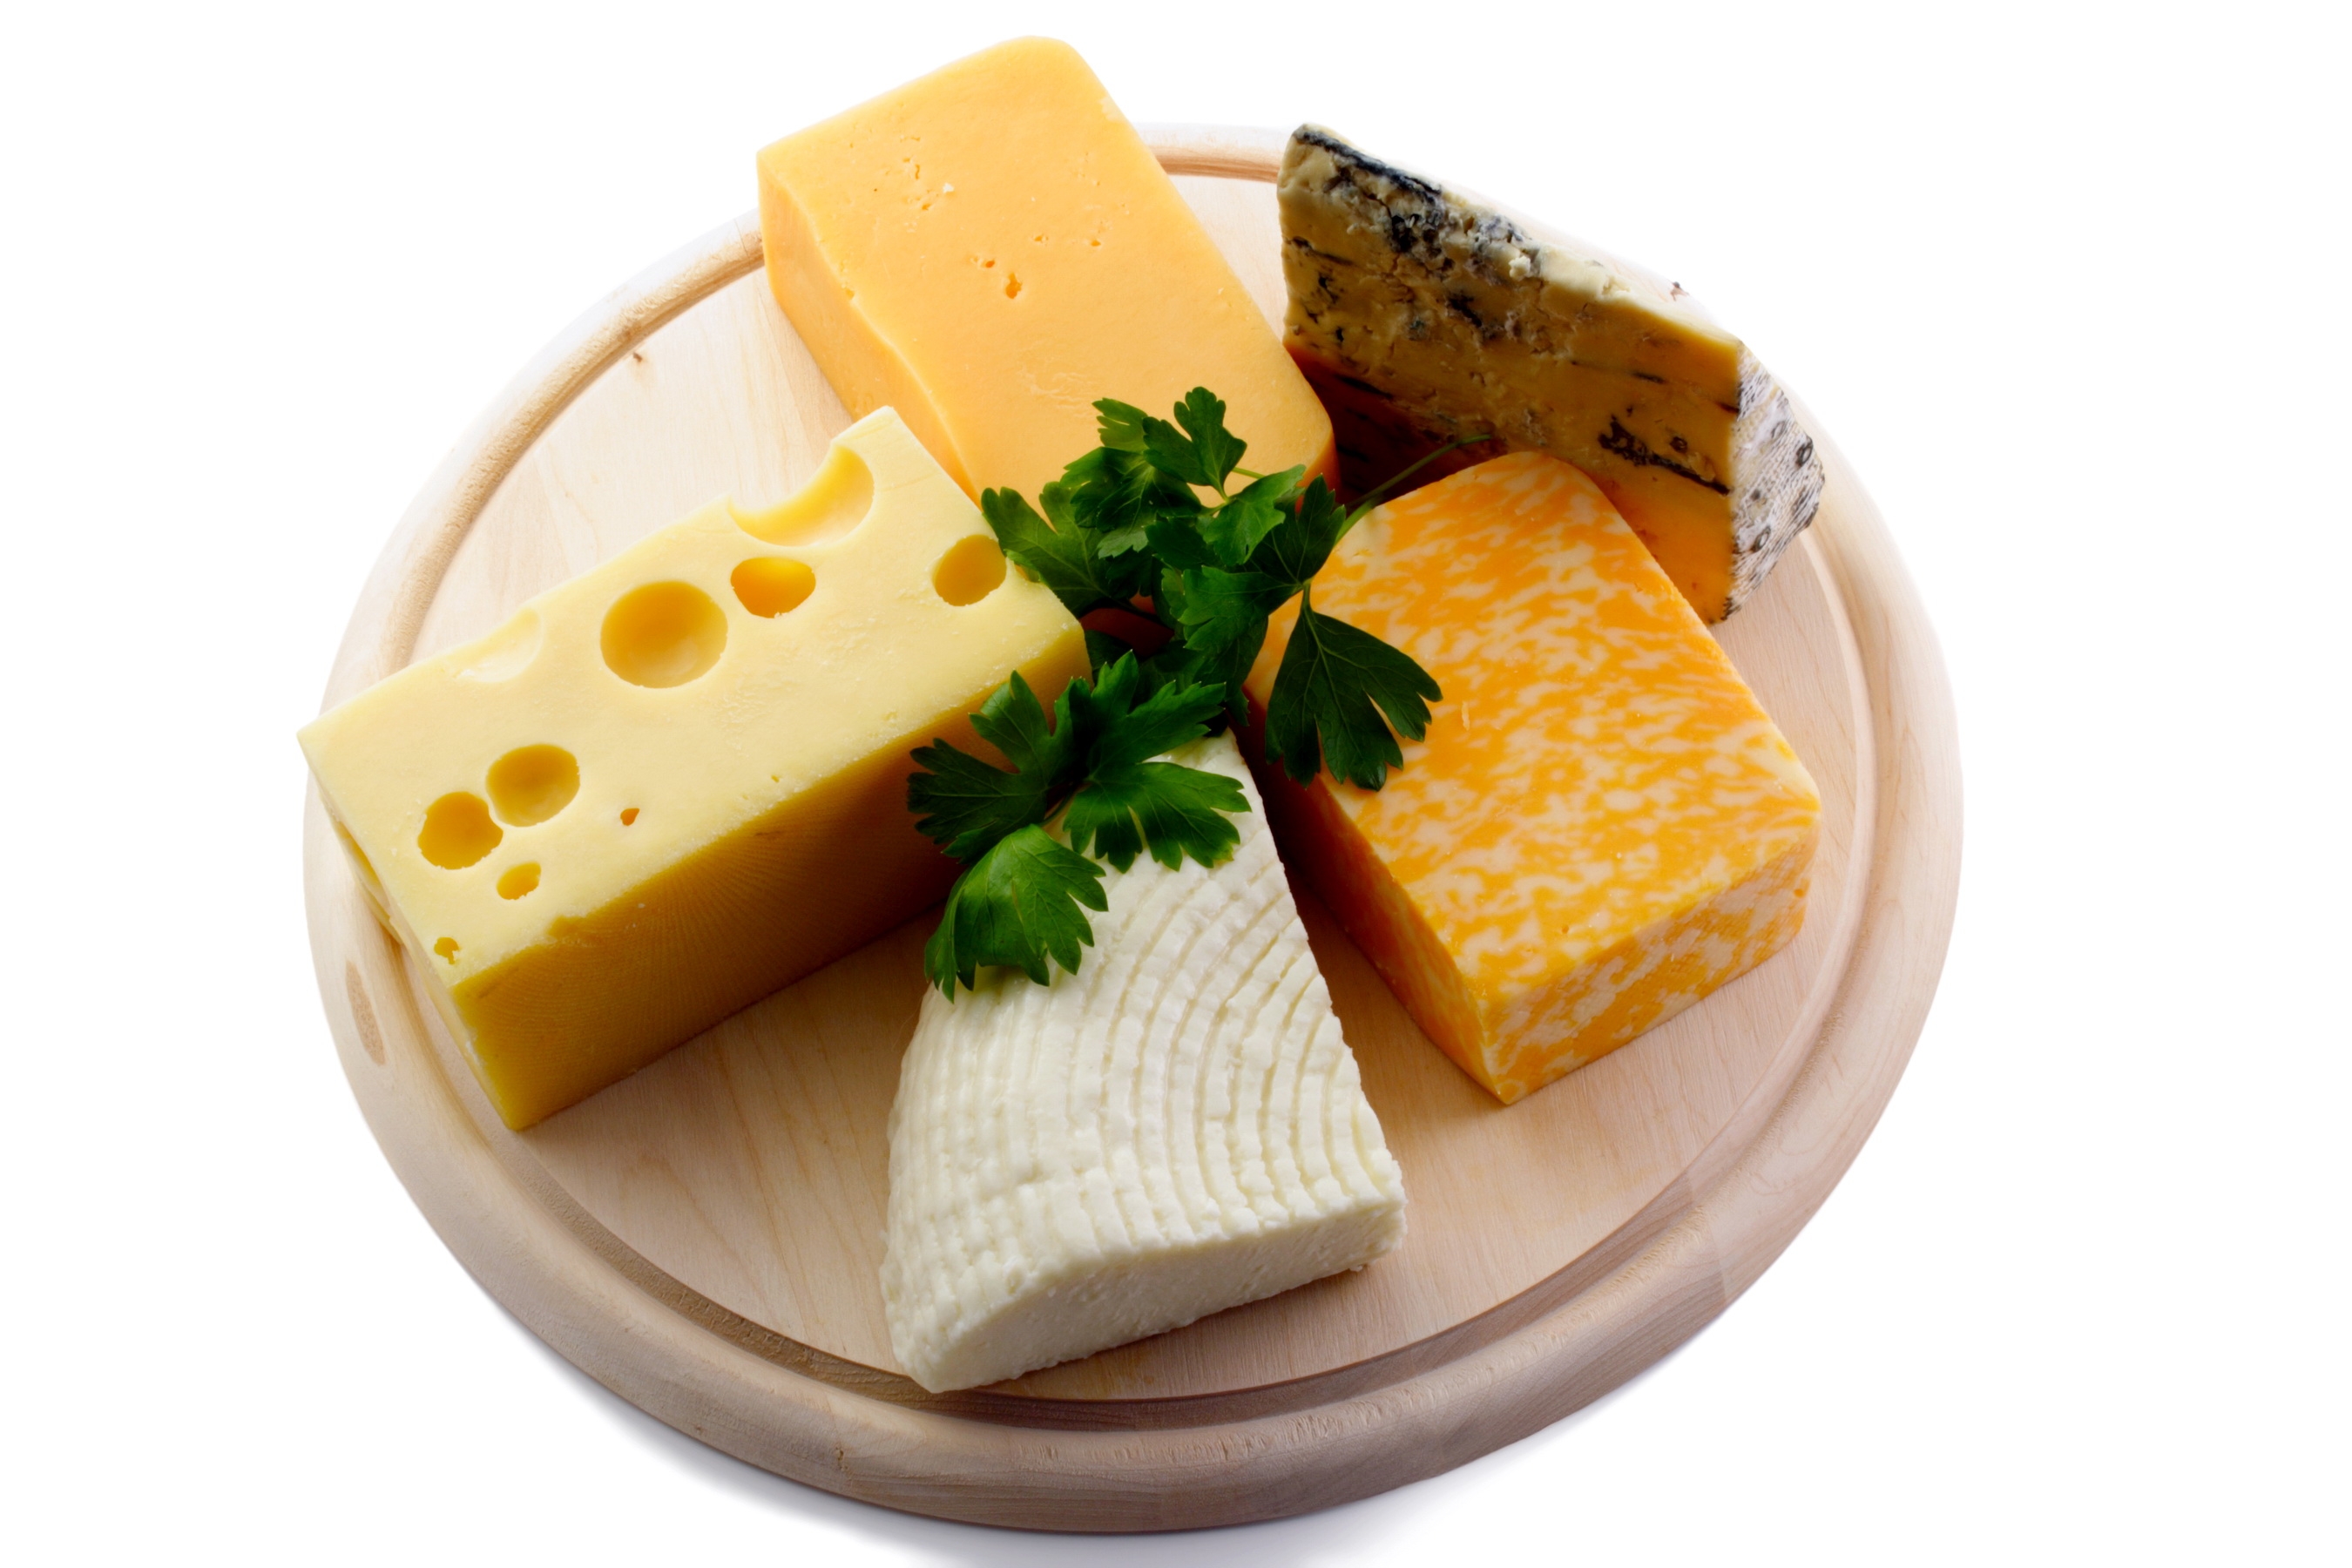 Wallpaper, breakfast, meal, cuisine, dish, produce, dairy product, asian food, variety, grade, cheeses, cheddar cheese 2700x1800